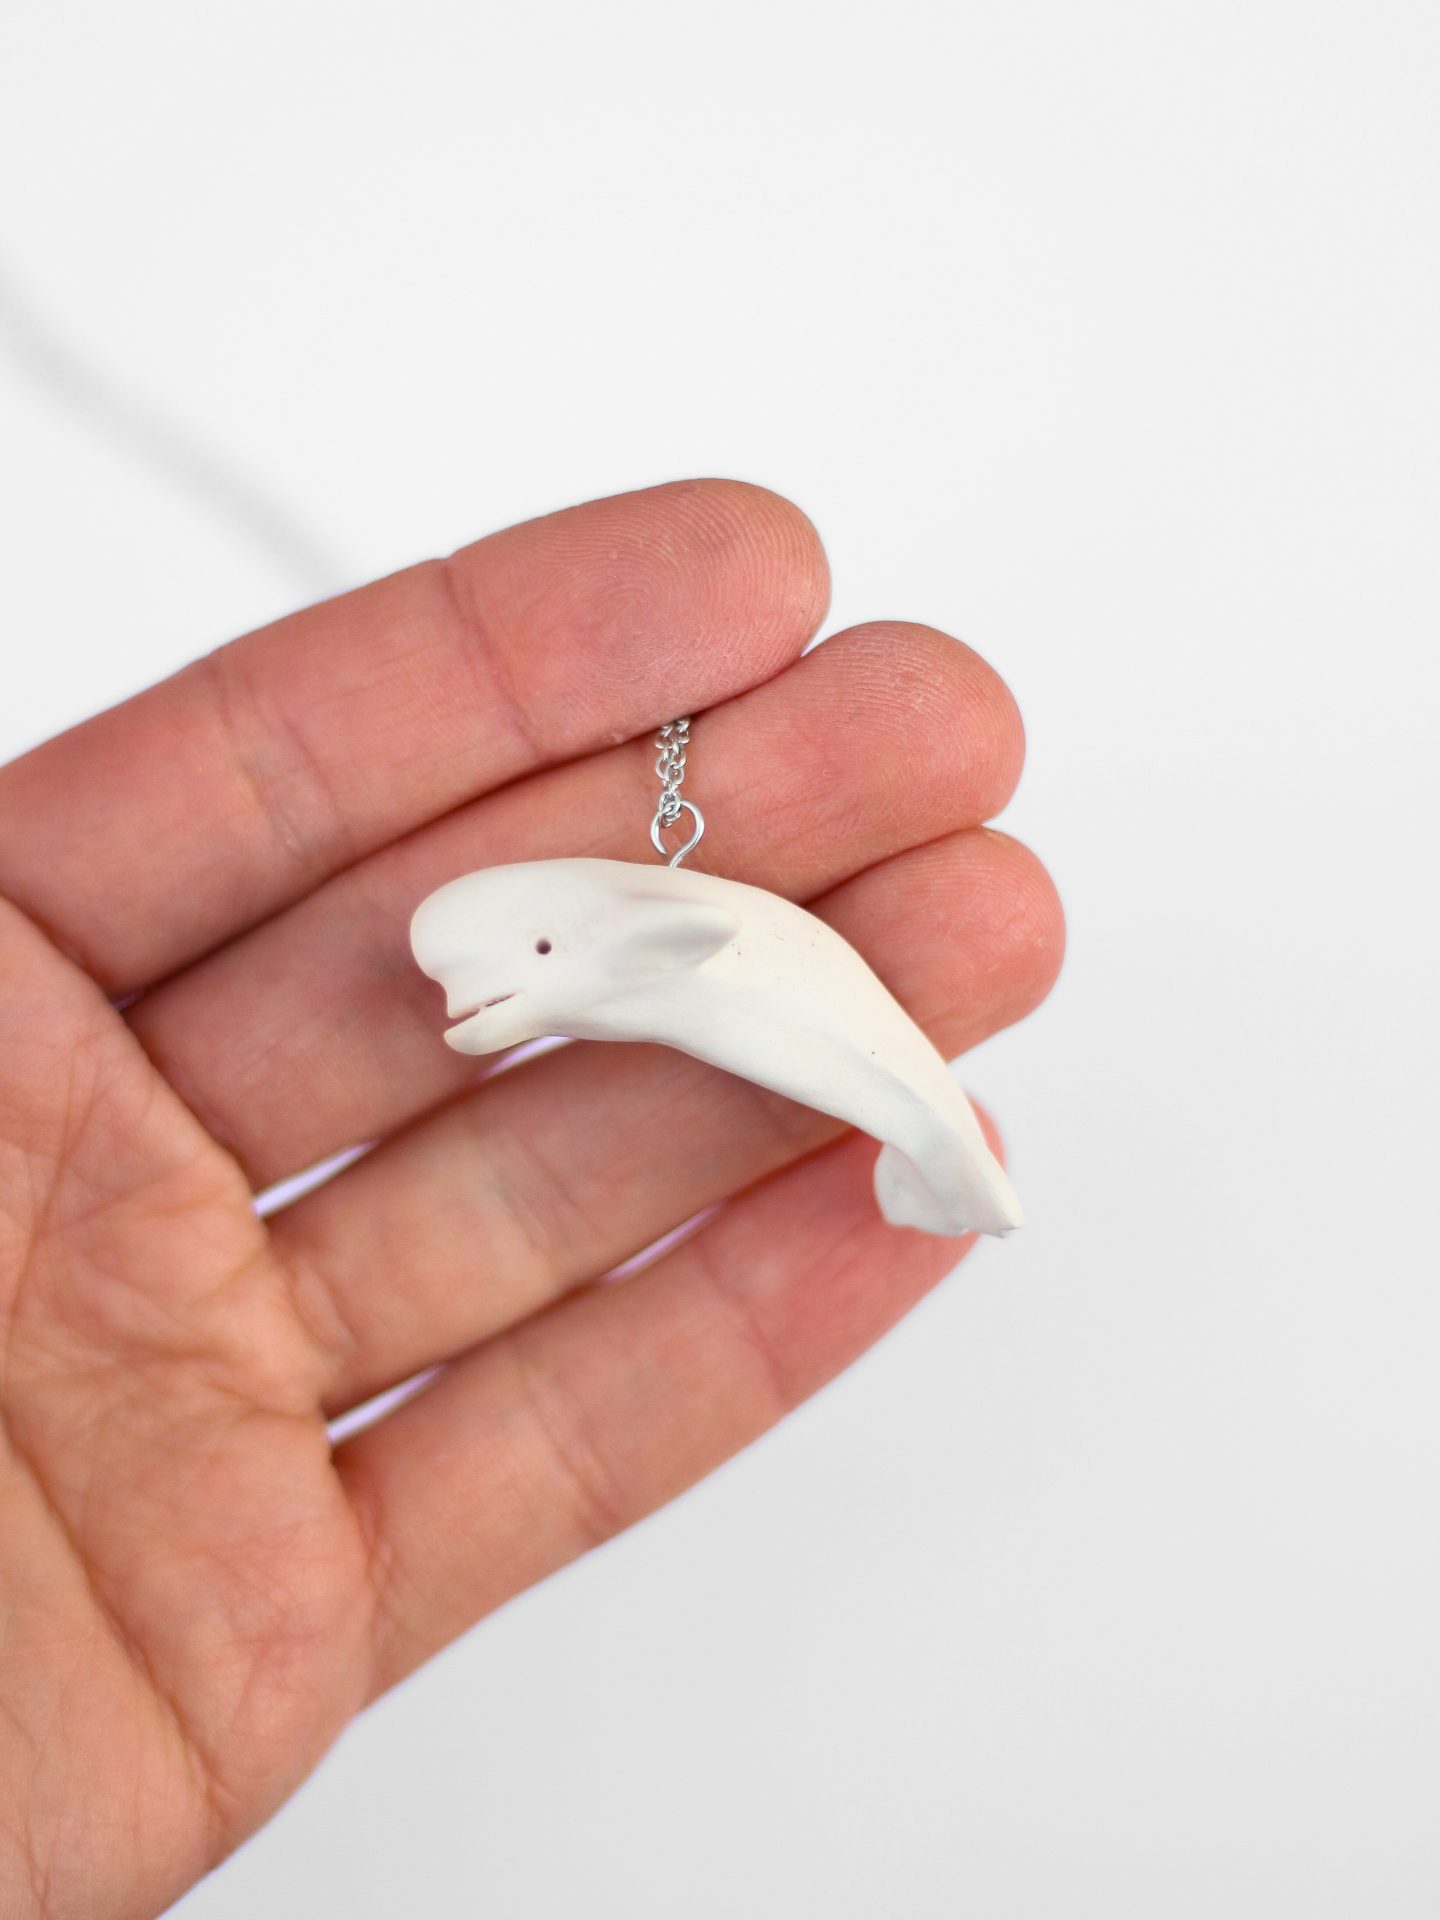 Beluga whale necklace